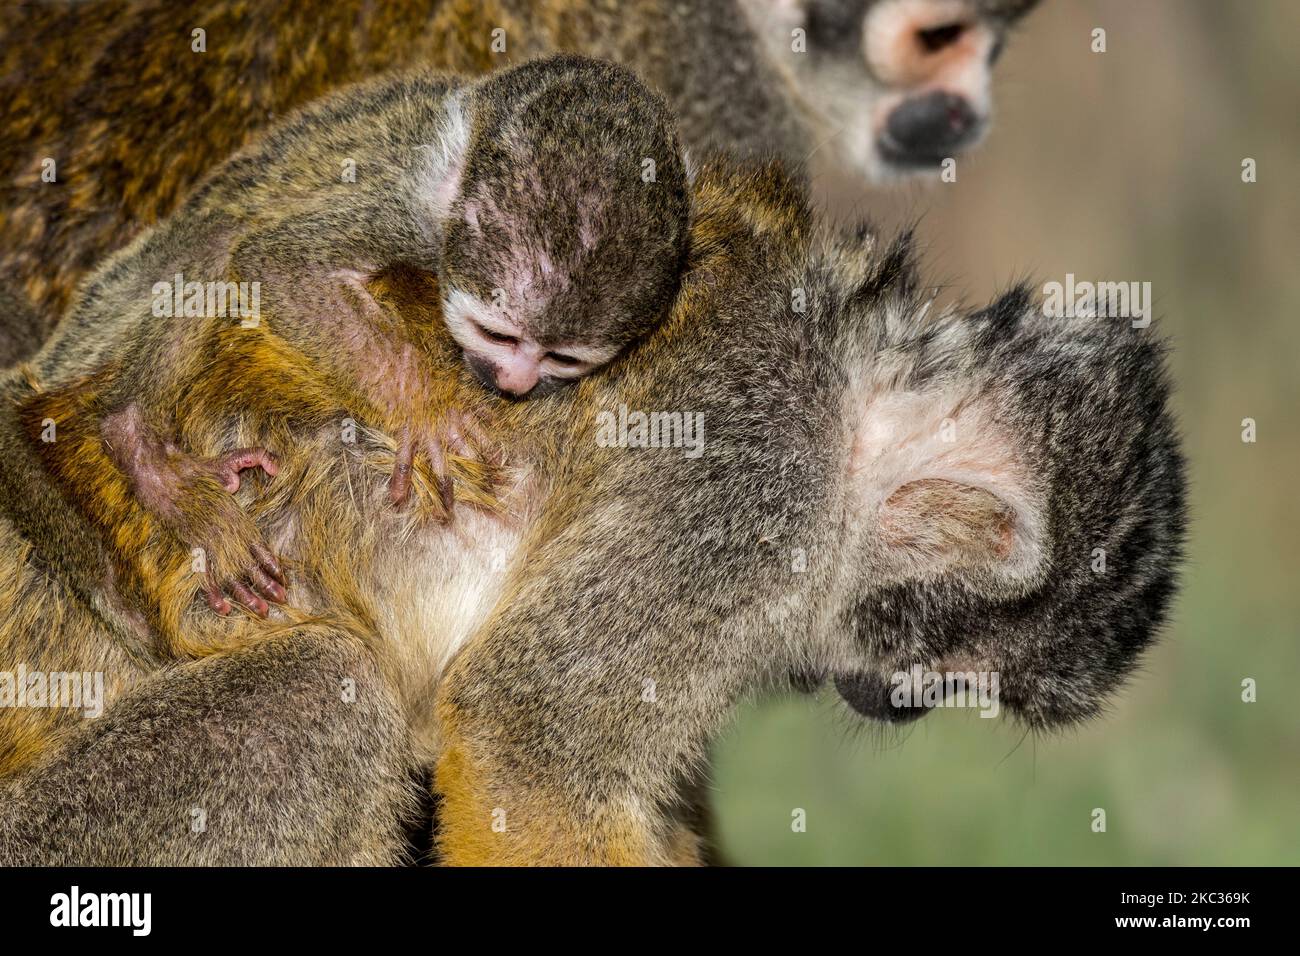 Black-capped squirrel monkey / Peruvian squirrel monkey (Saimiri boliviensis peruviensis) female with infant clinging to its back Stock Photo